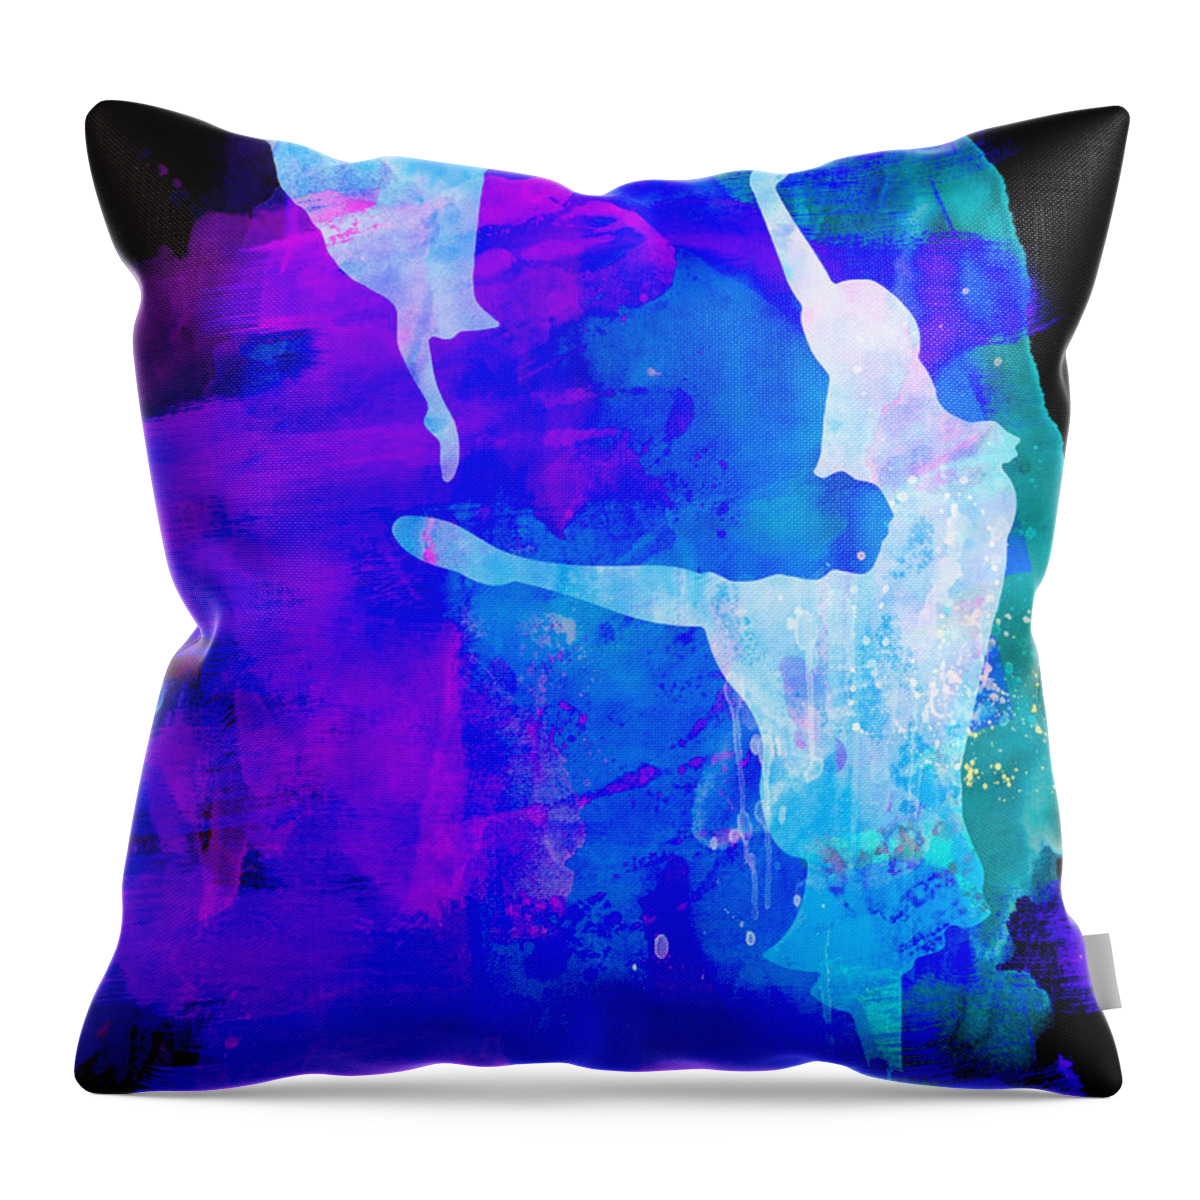 Ballet Throw Pillow featuring the painting Two Ballerinas Watercolor 3 by Naxart Studio